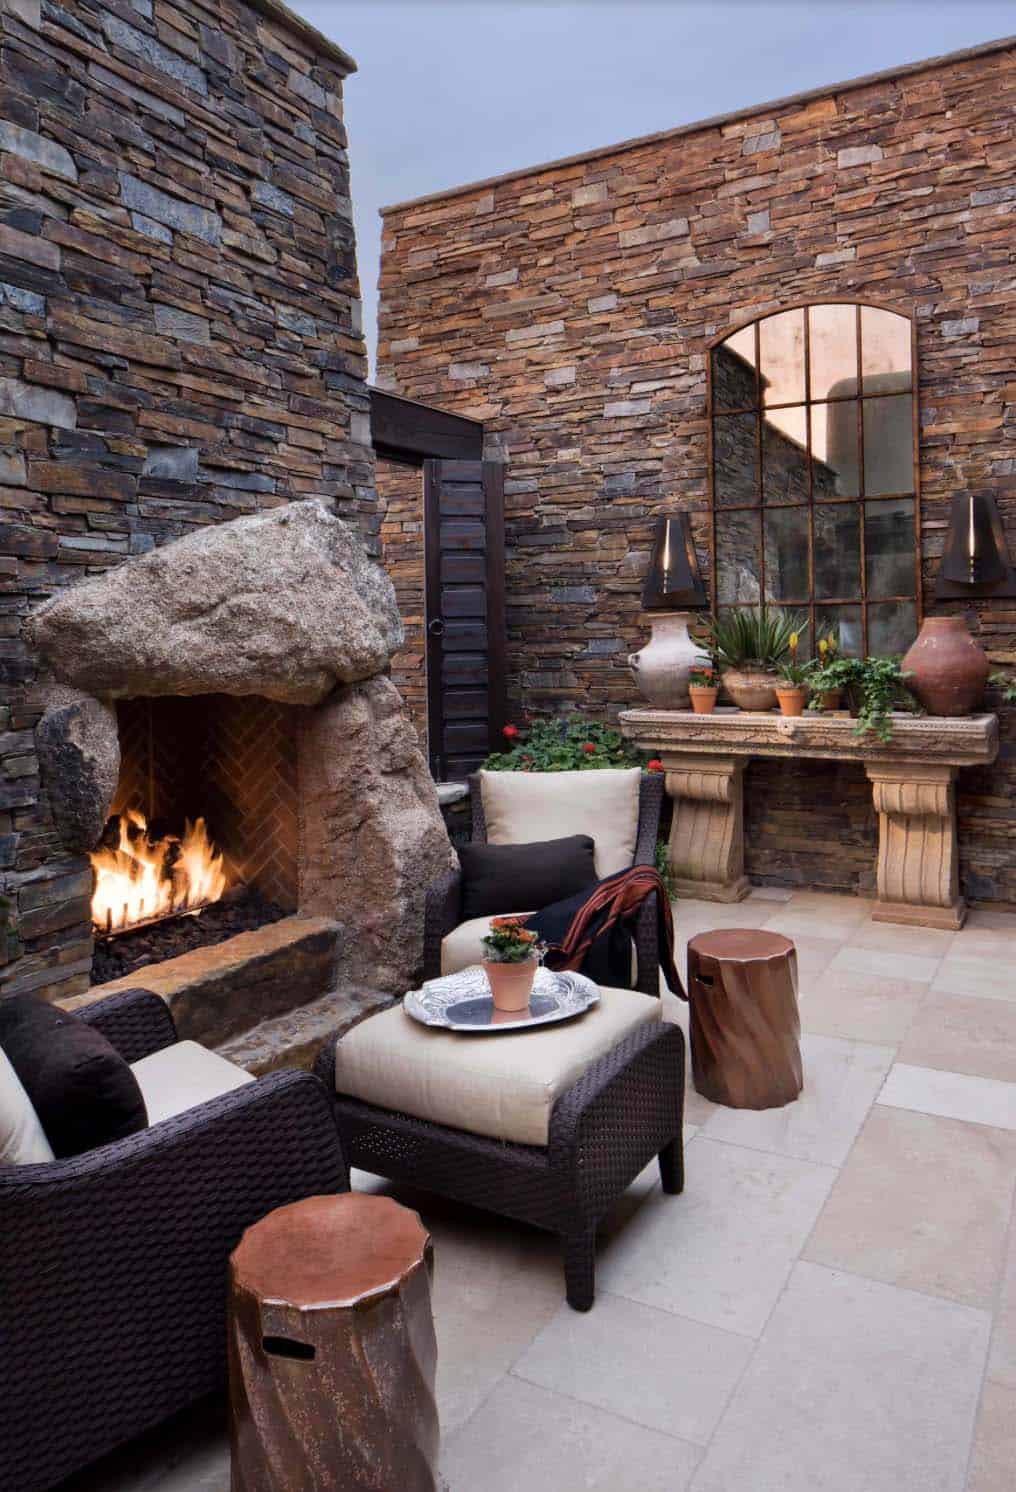 desert contemporary outdoor fireplace with wicker furnishings and a mirror on the wall